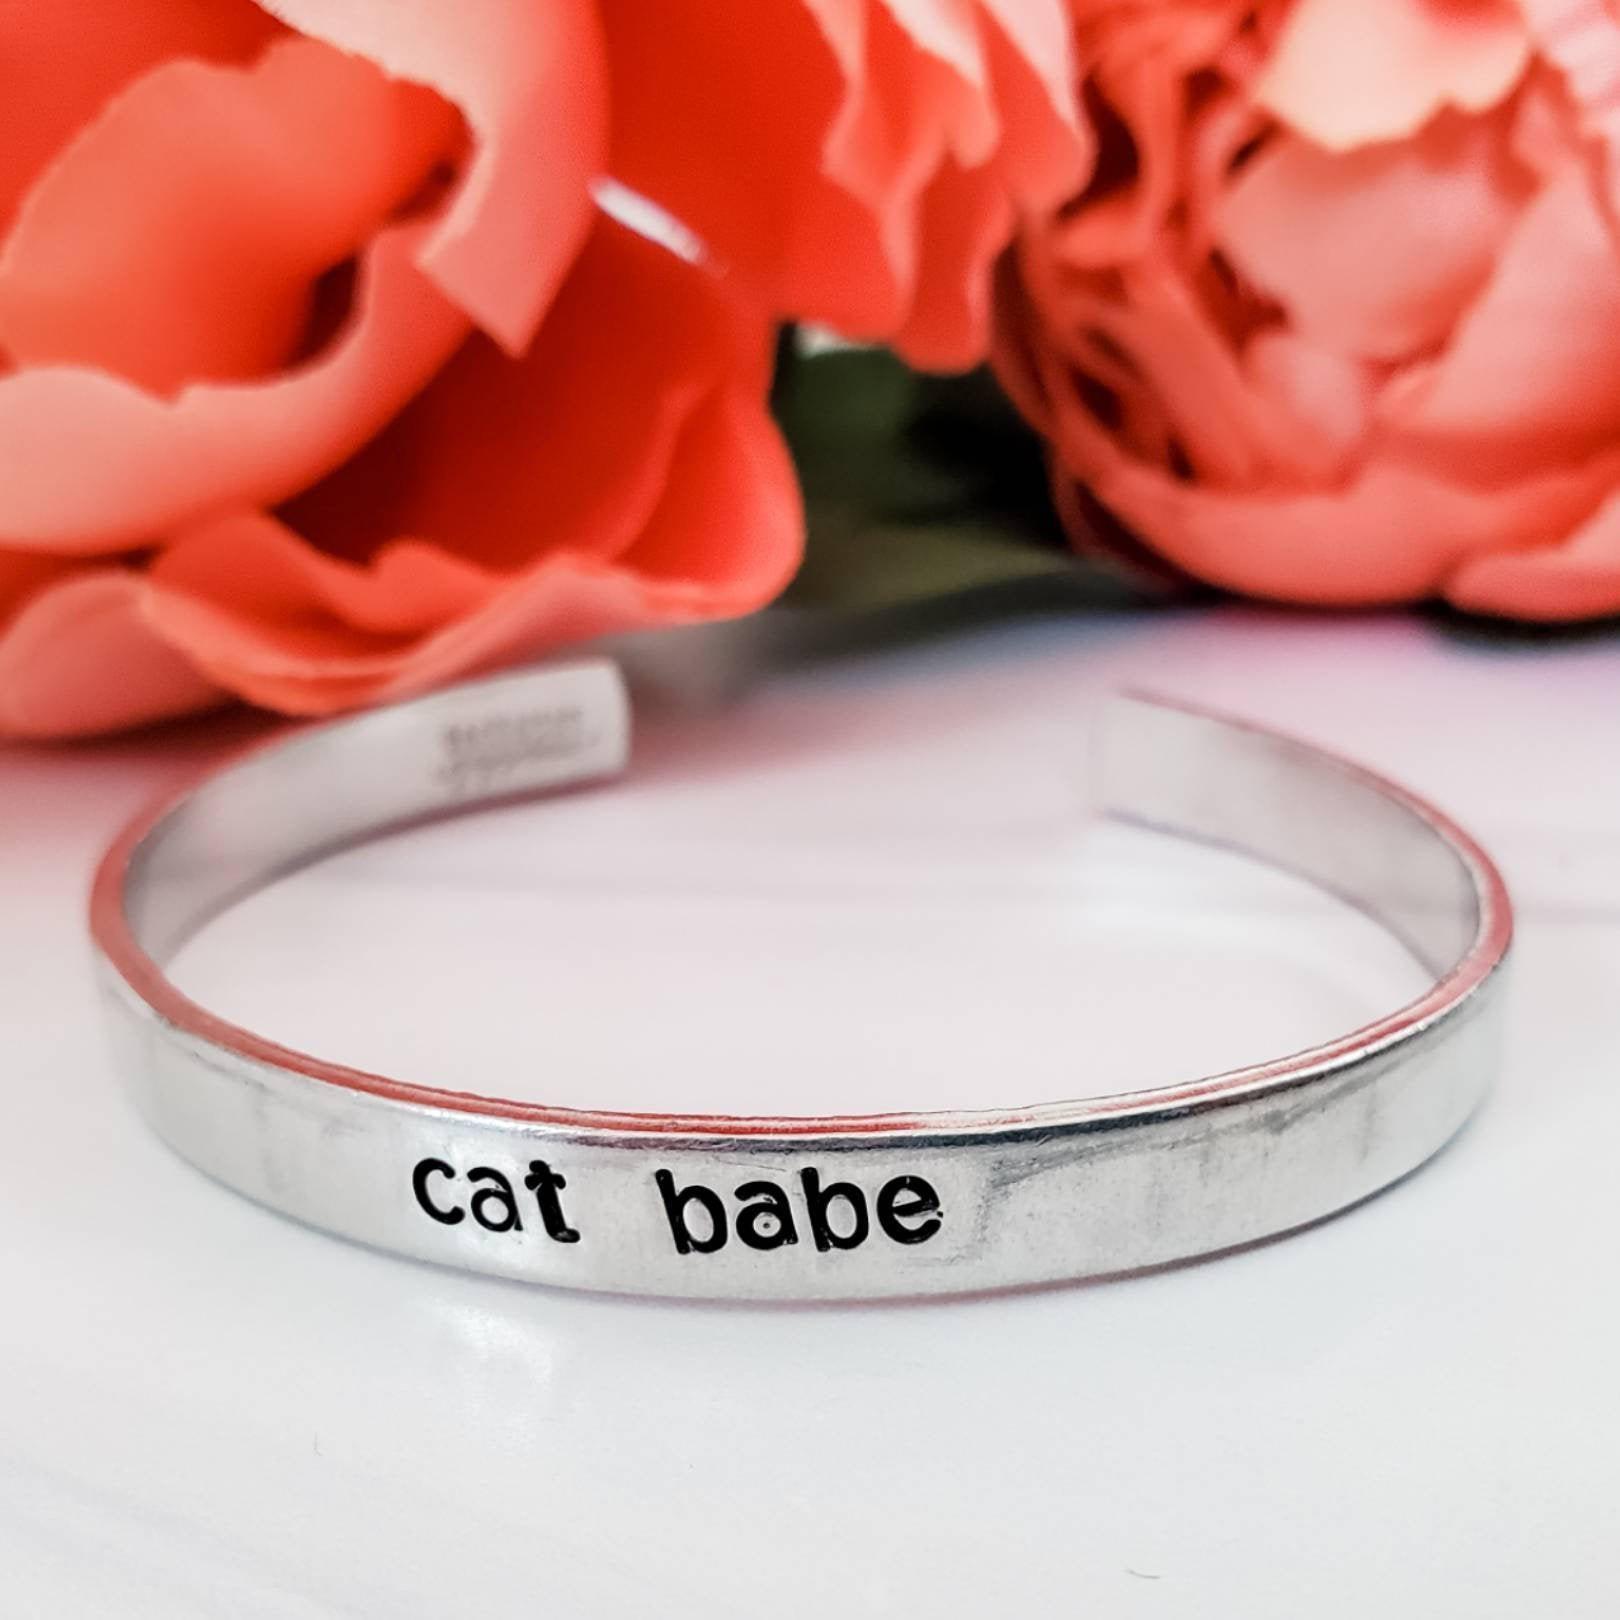 CAT BABE Stacking Cuff Bracelet Salt and Sparkle